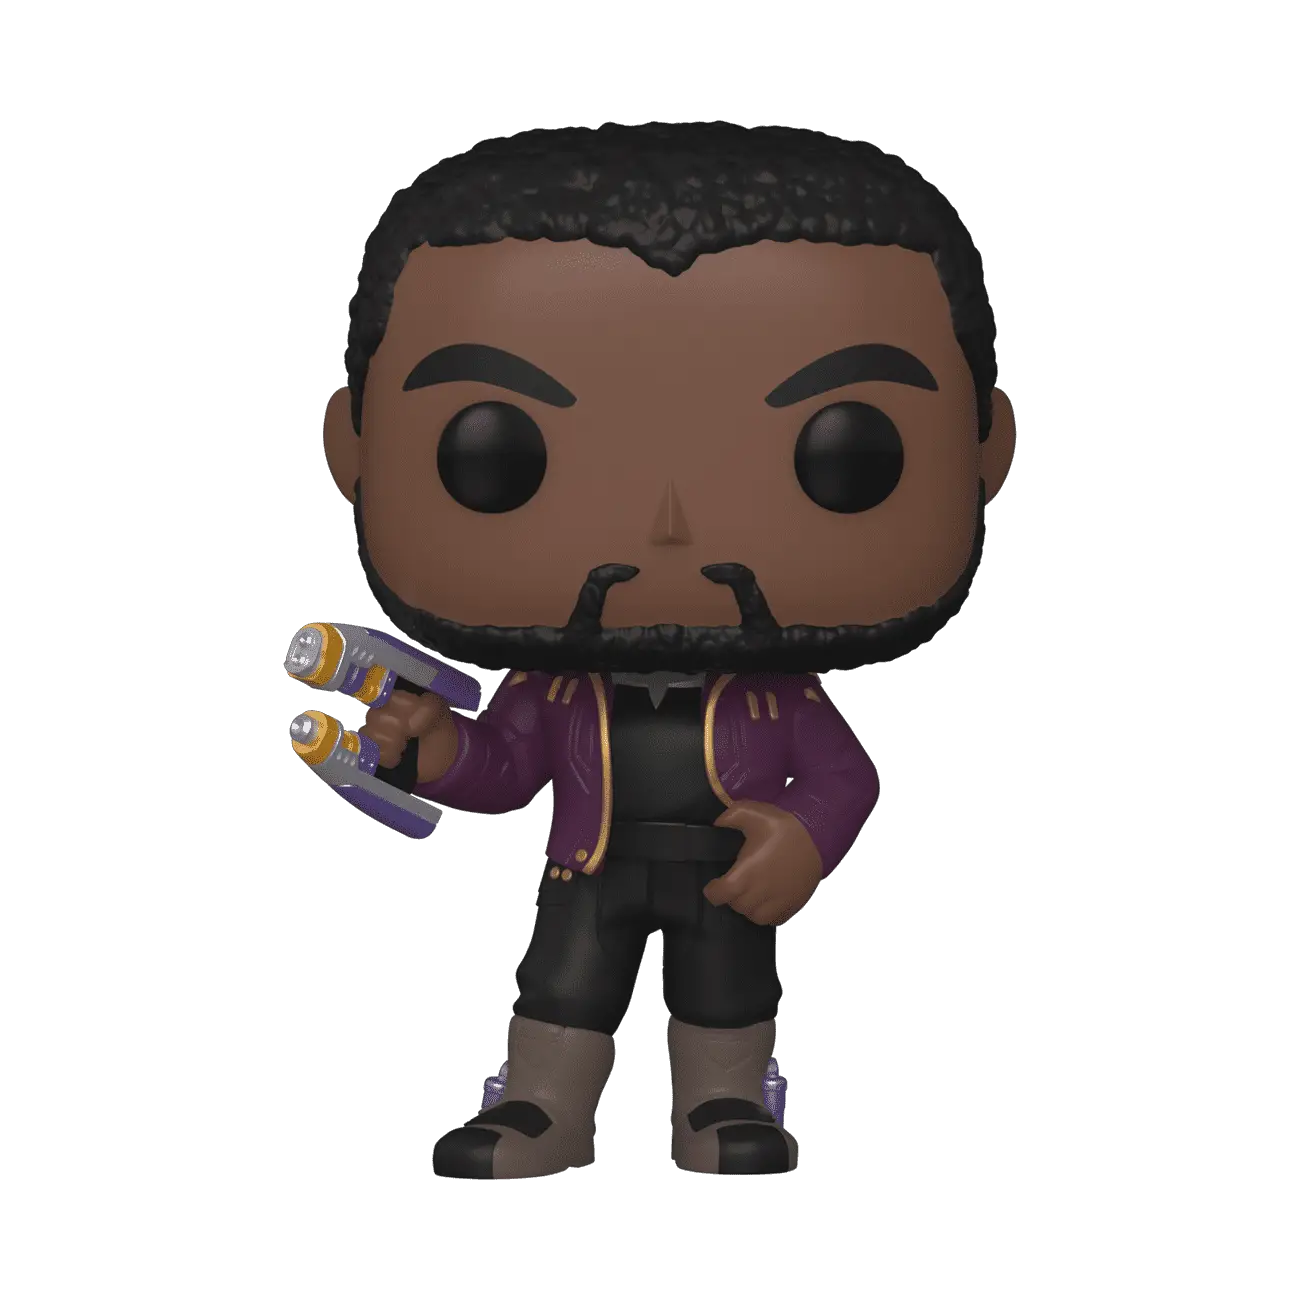 T'Challa Star-Lord Funko Pop - available exclusively at FYE What If…?